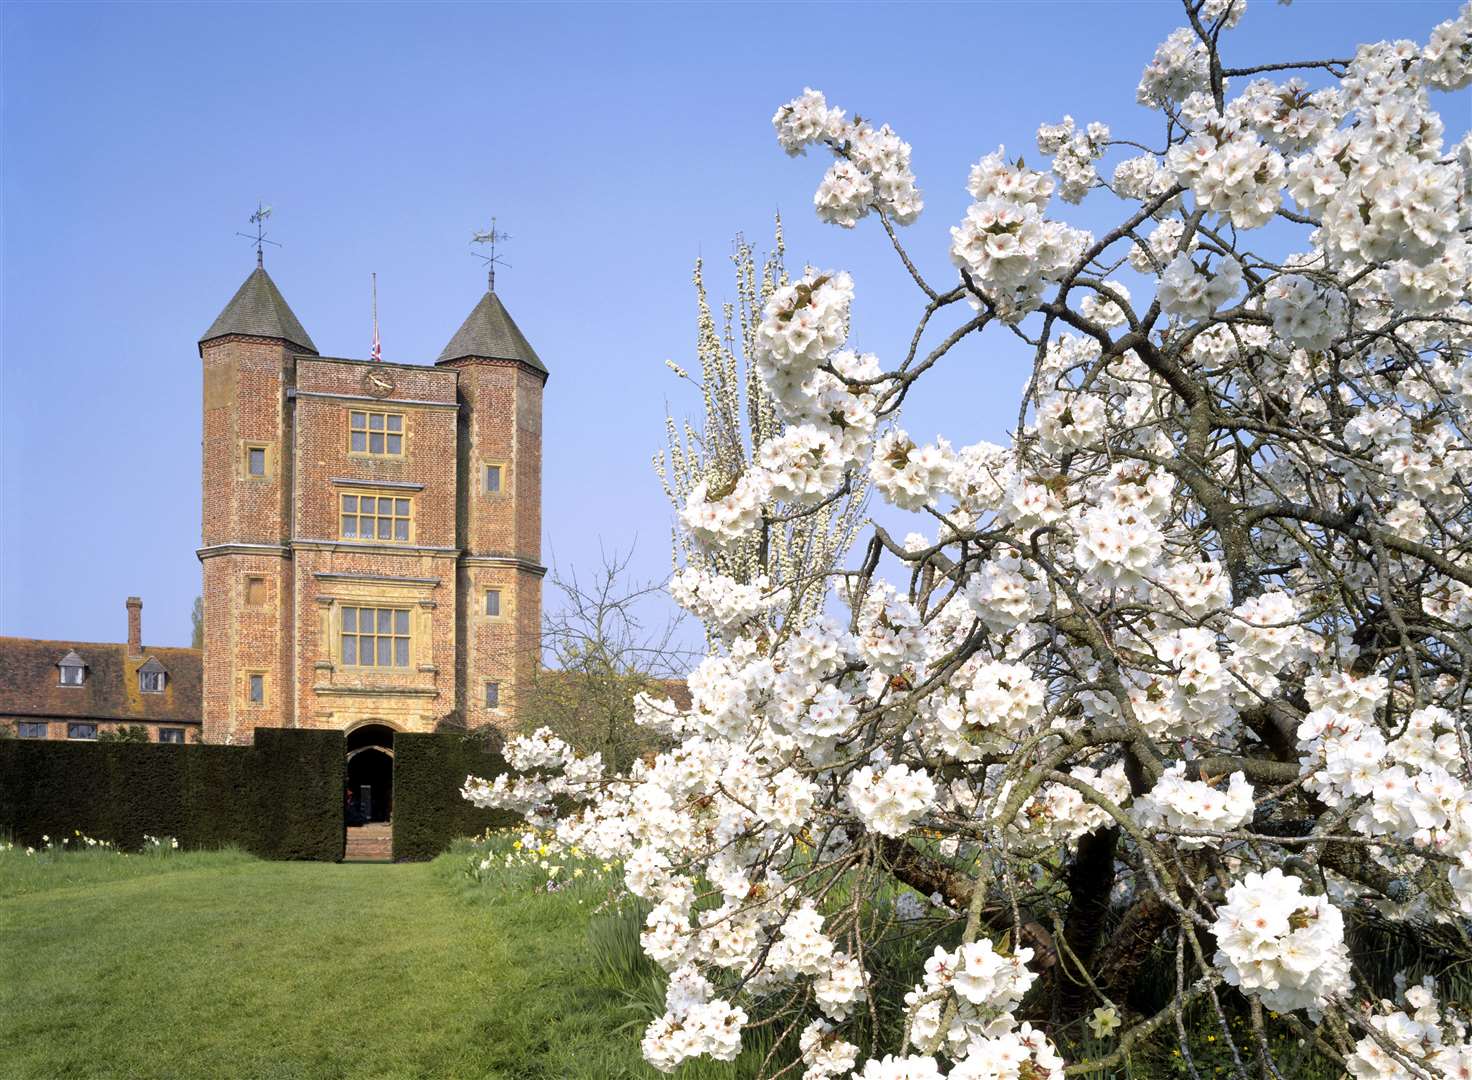 Enjoy a spring visit to the renowned gardens at Sissinghurst. Picture: © National Trust Images / David Sellman